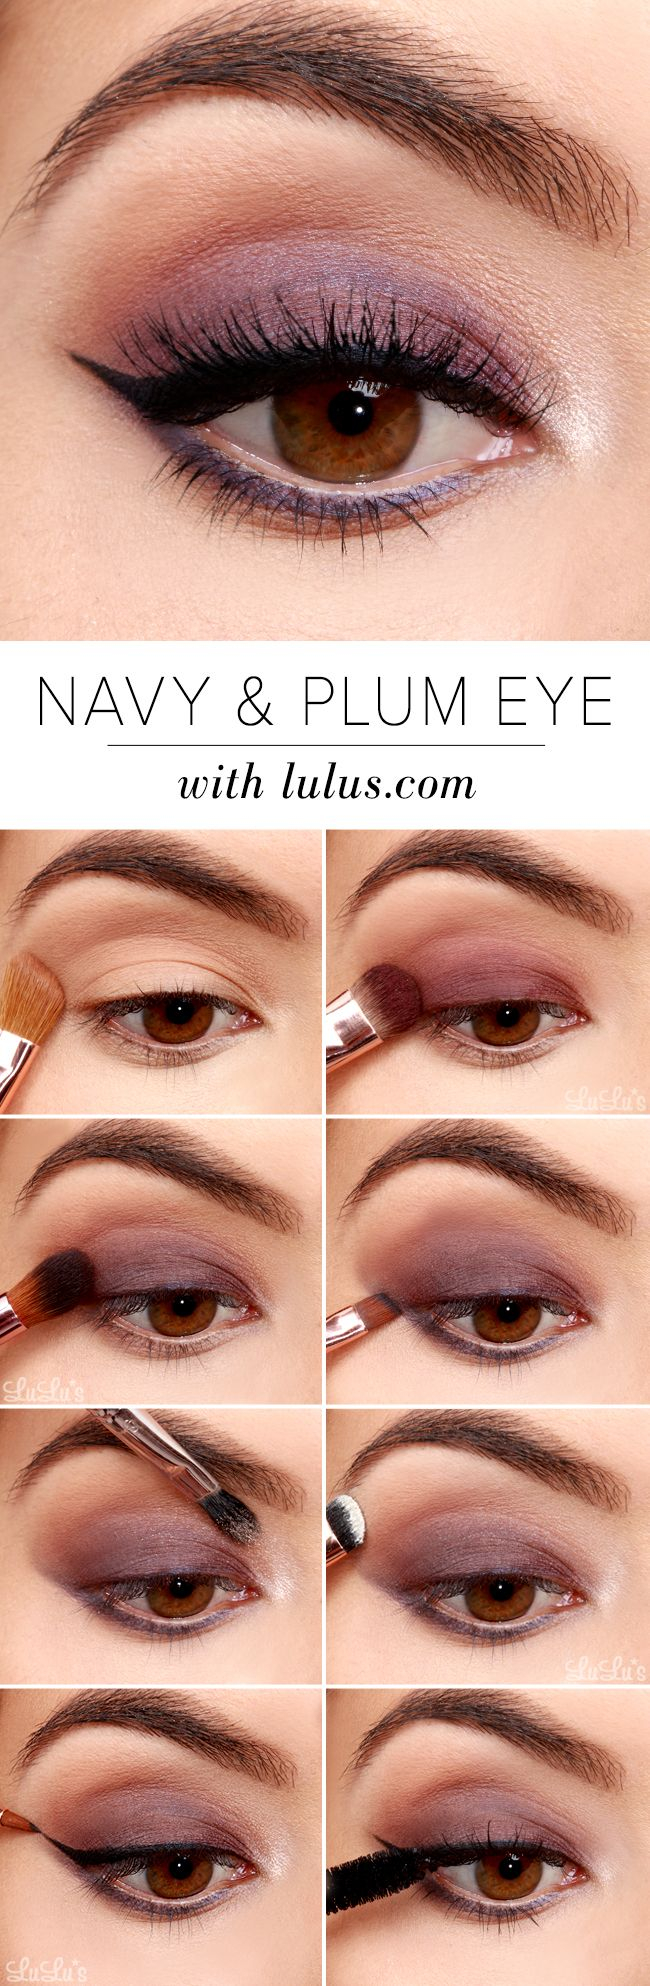 Makeup Ideas For Brown Eyes 27 Pretty Makeup Tutorials For Brown Eyes Styles Weekly